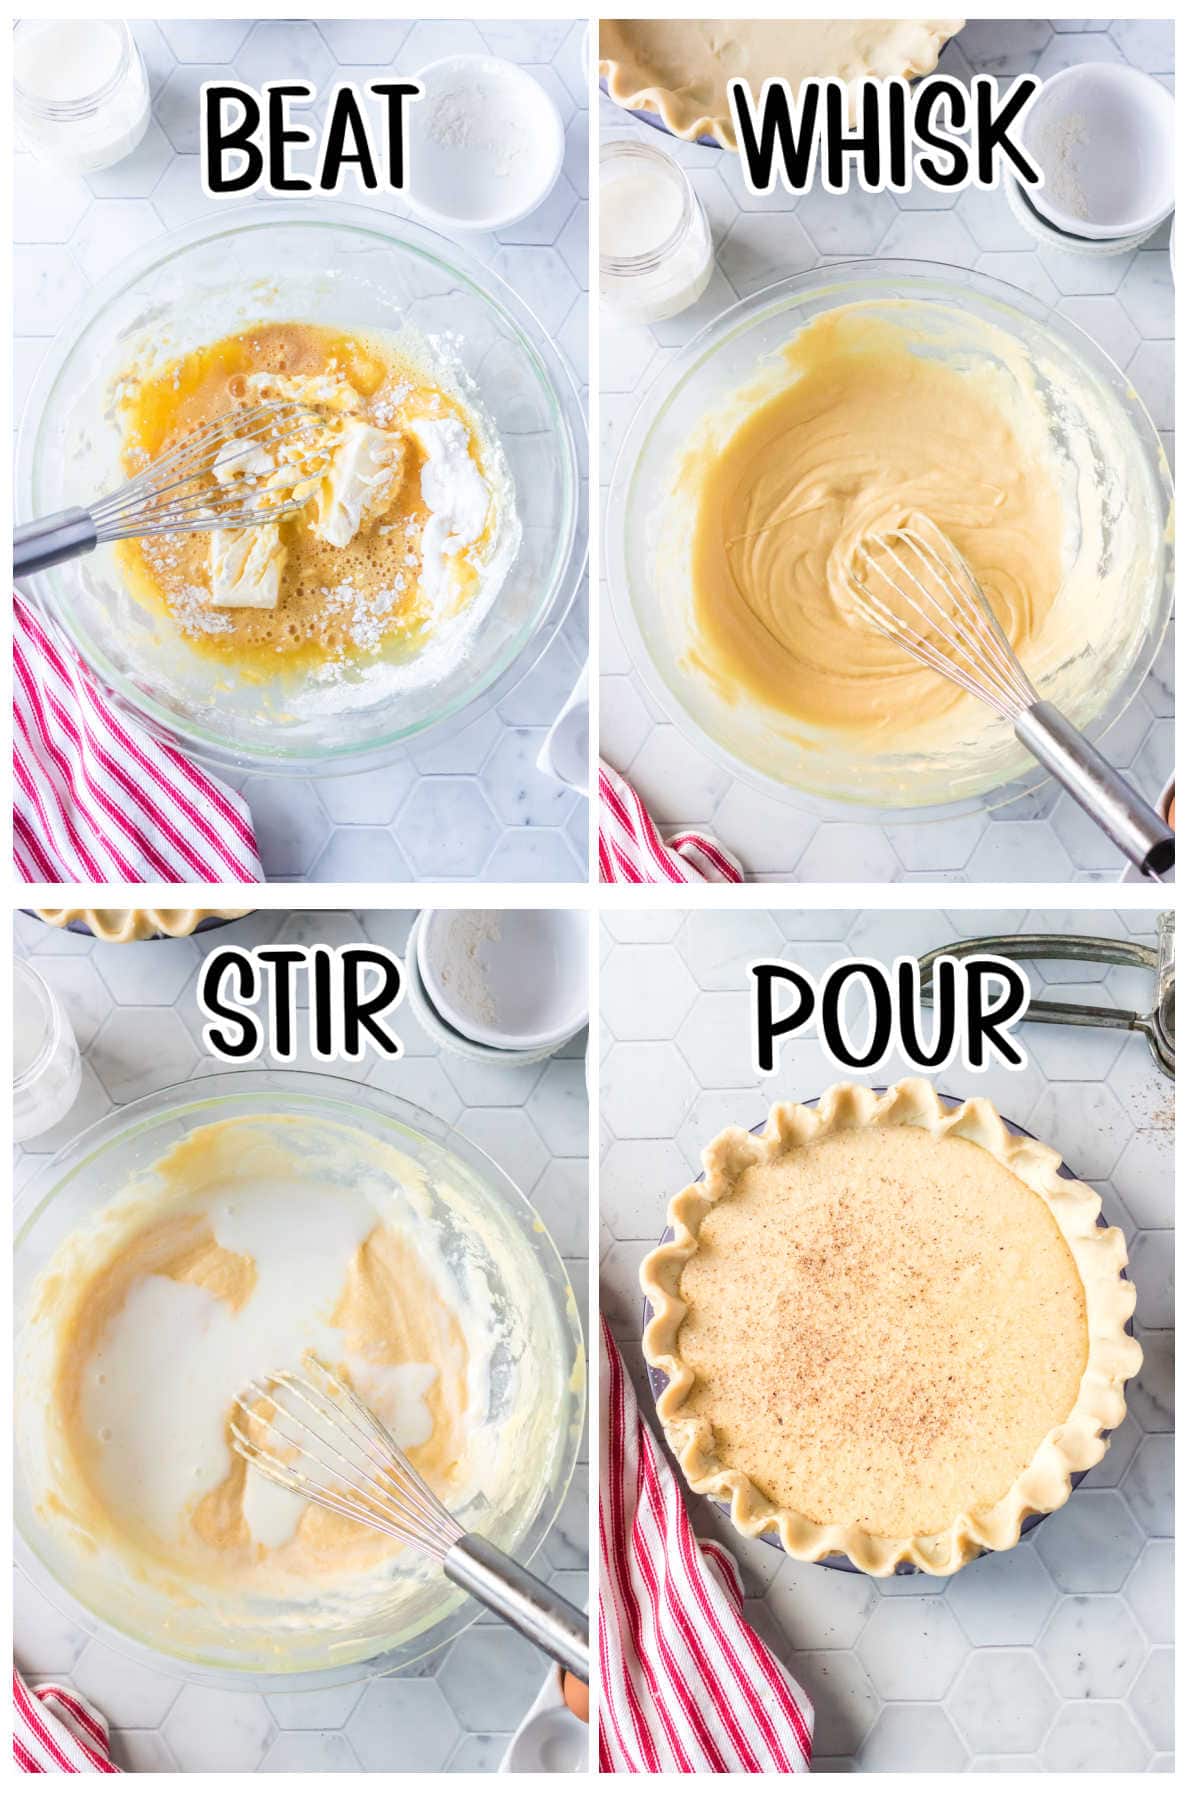 Southern buttermilk pie step by step instructions.